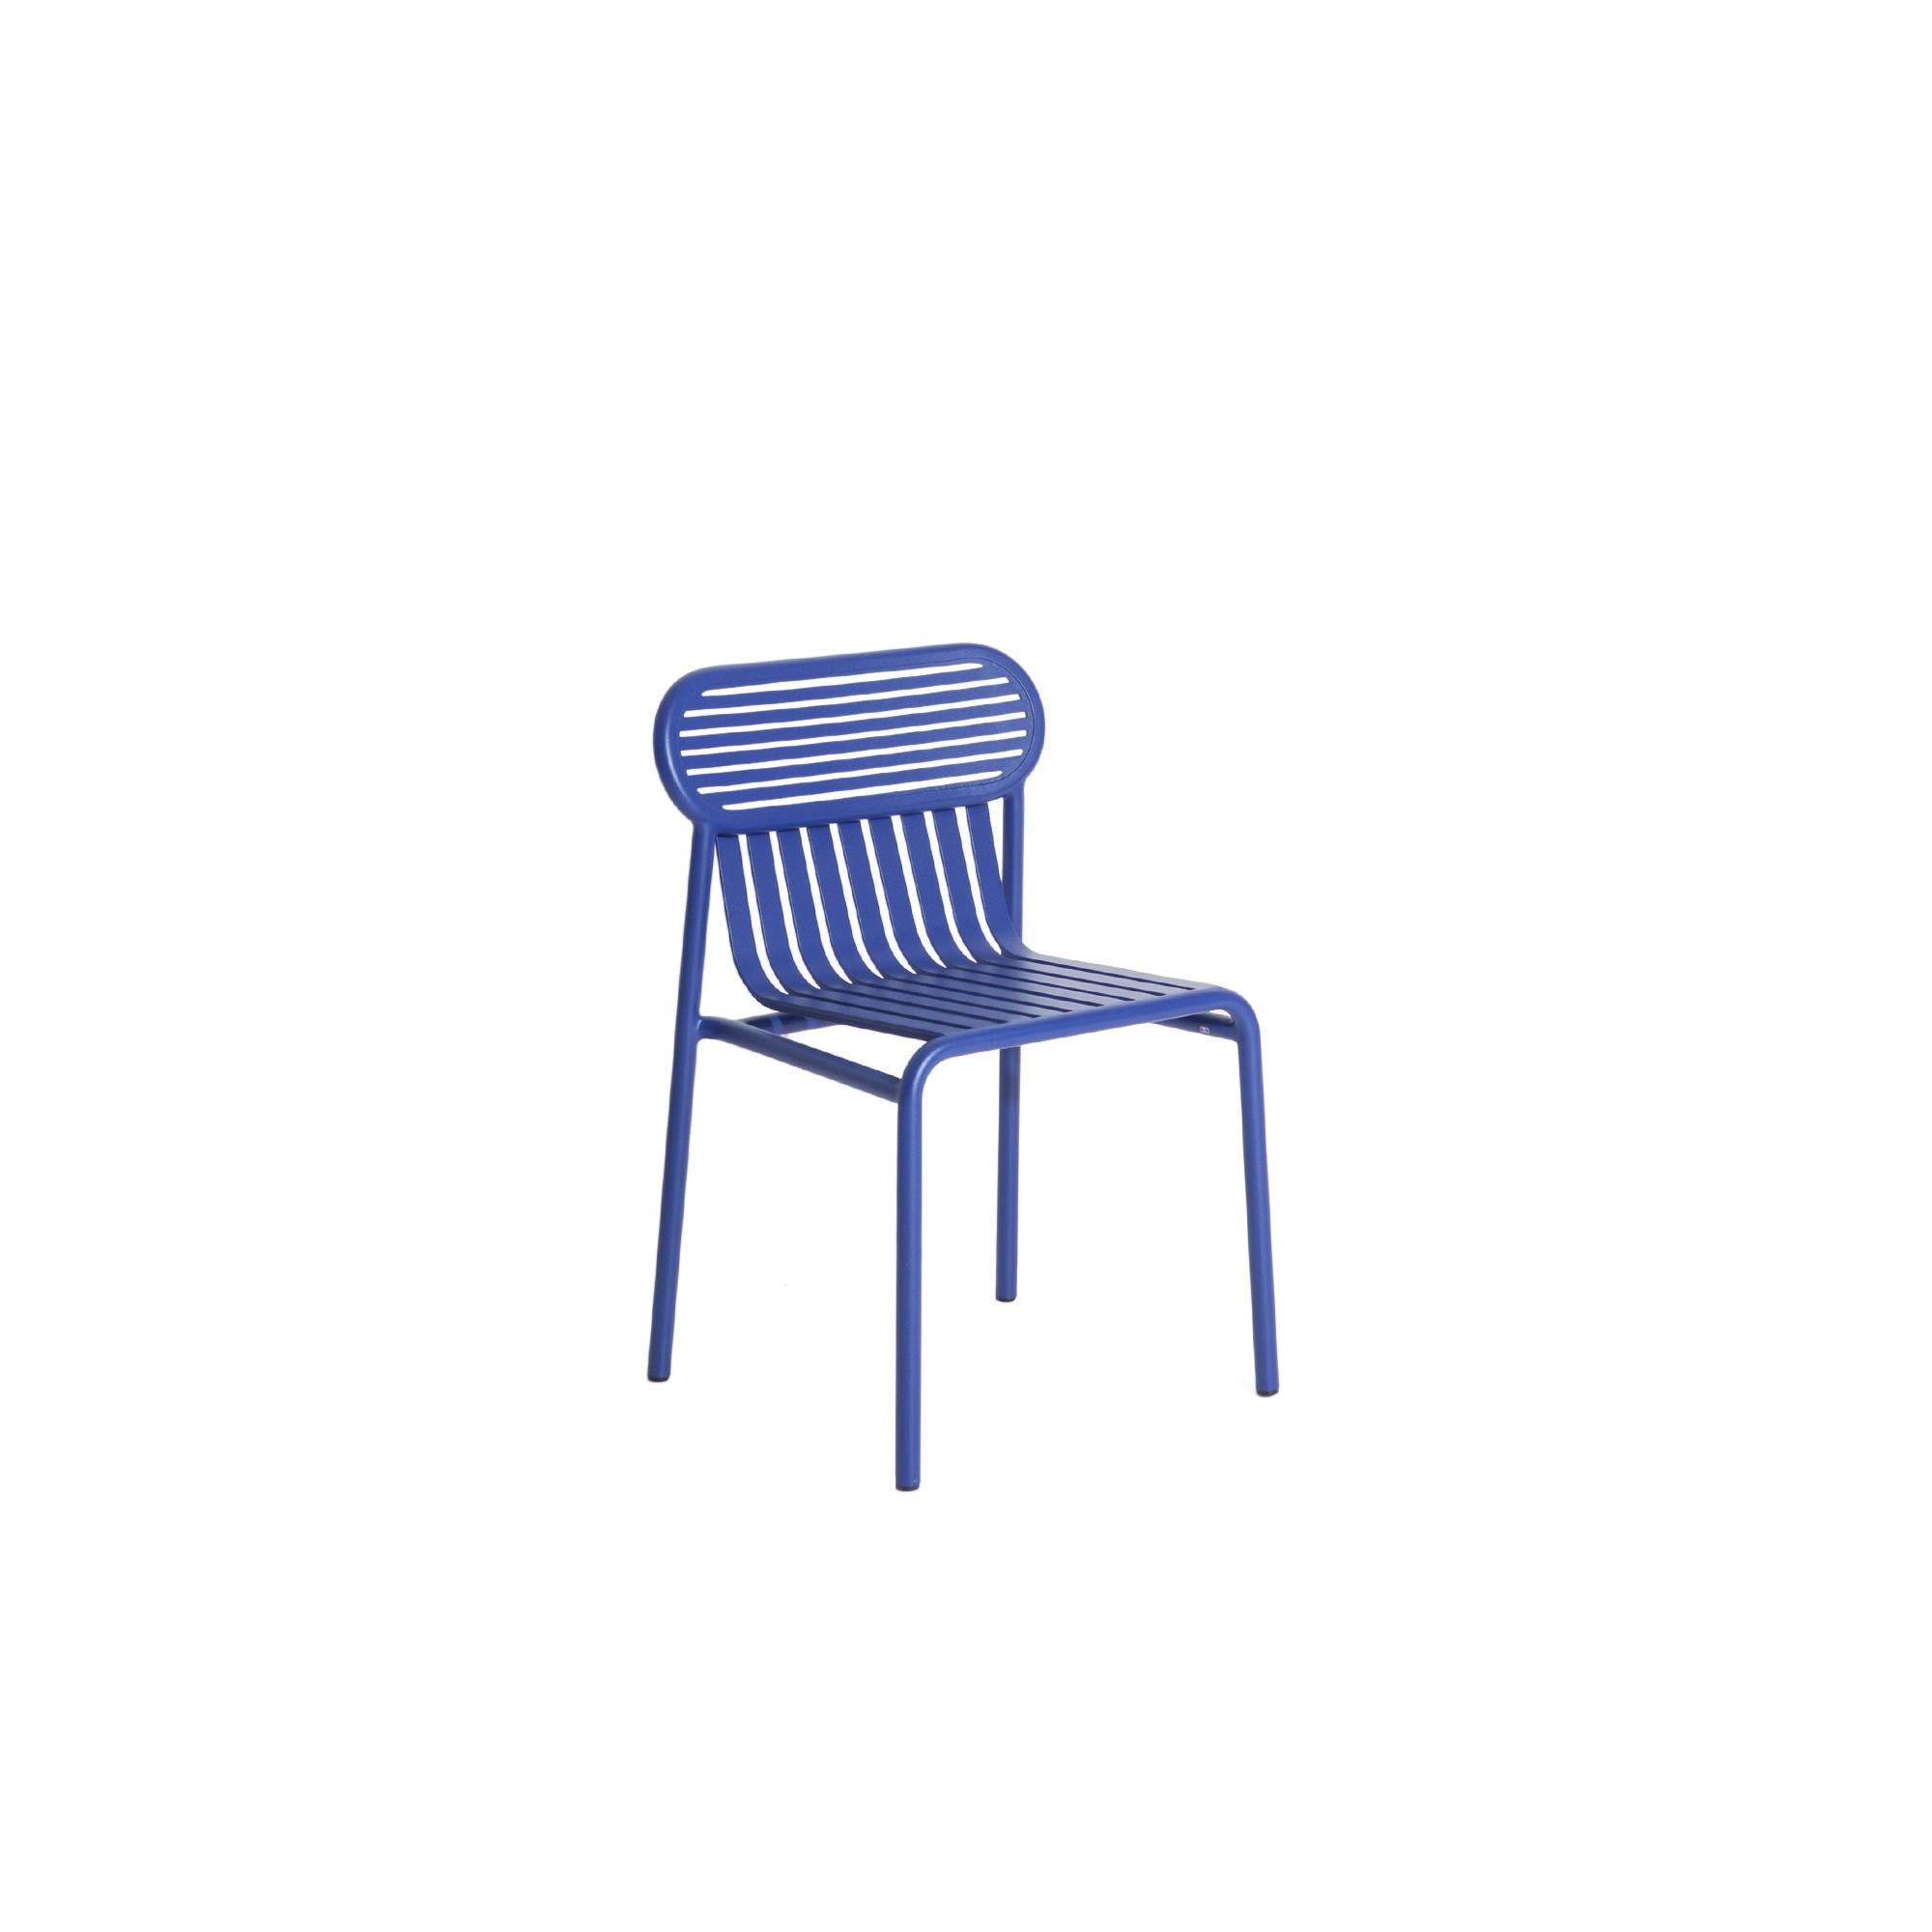 Petite Friture Week-End Chair in Blue Aluminium by Studio BrichetZiegler, 2017

The week-end collection is a full range of outdoor furniture, in aluminium grained epoxy paint, matt finish, that includes 18 functions and 8 colours for the retail